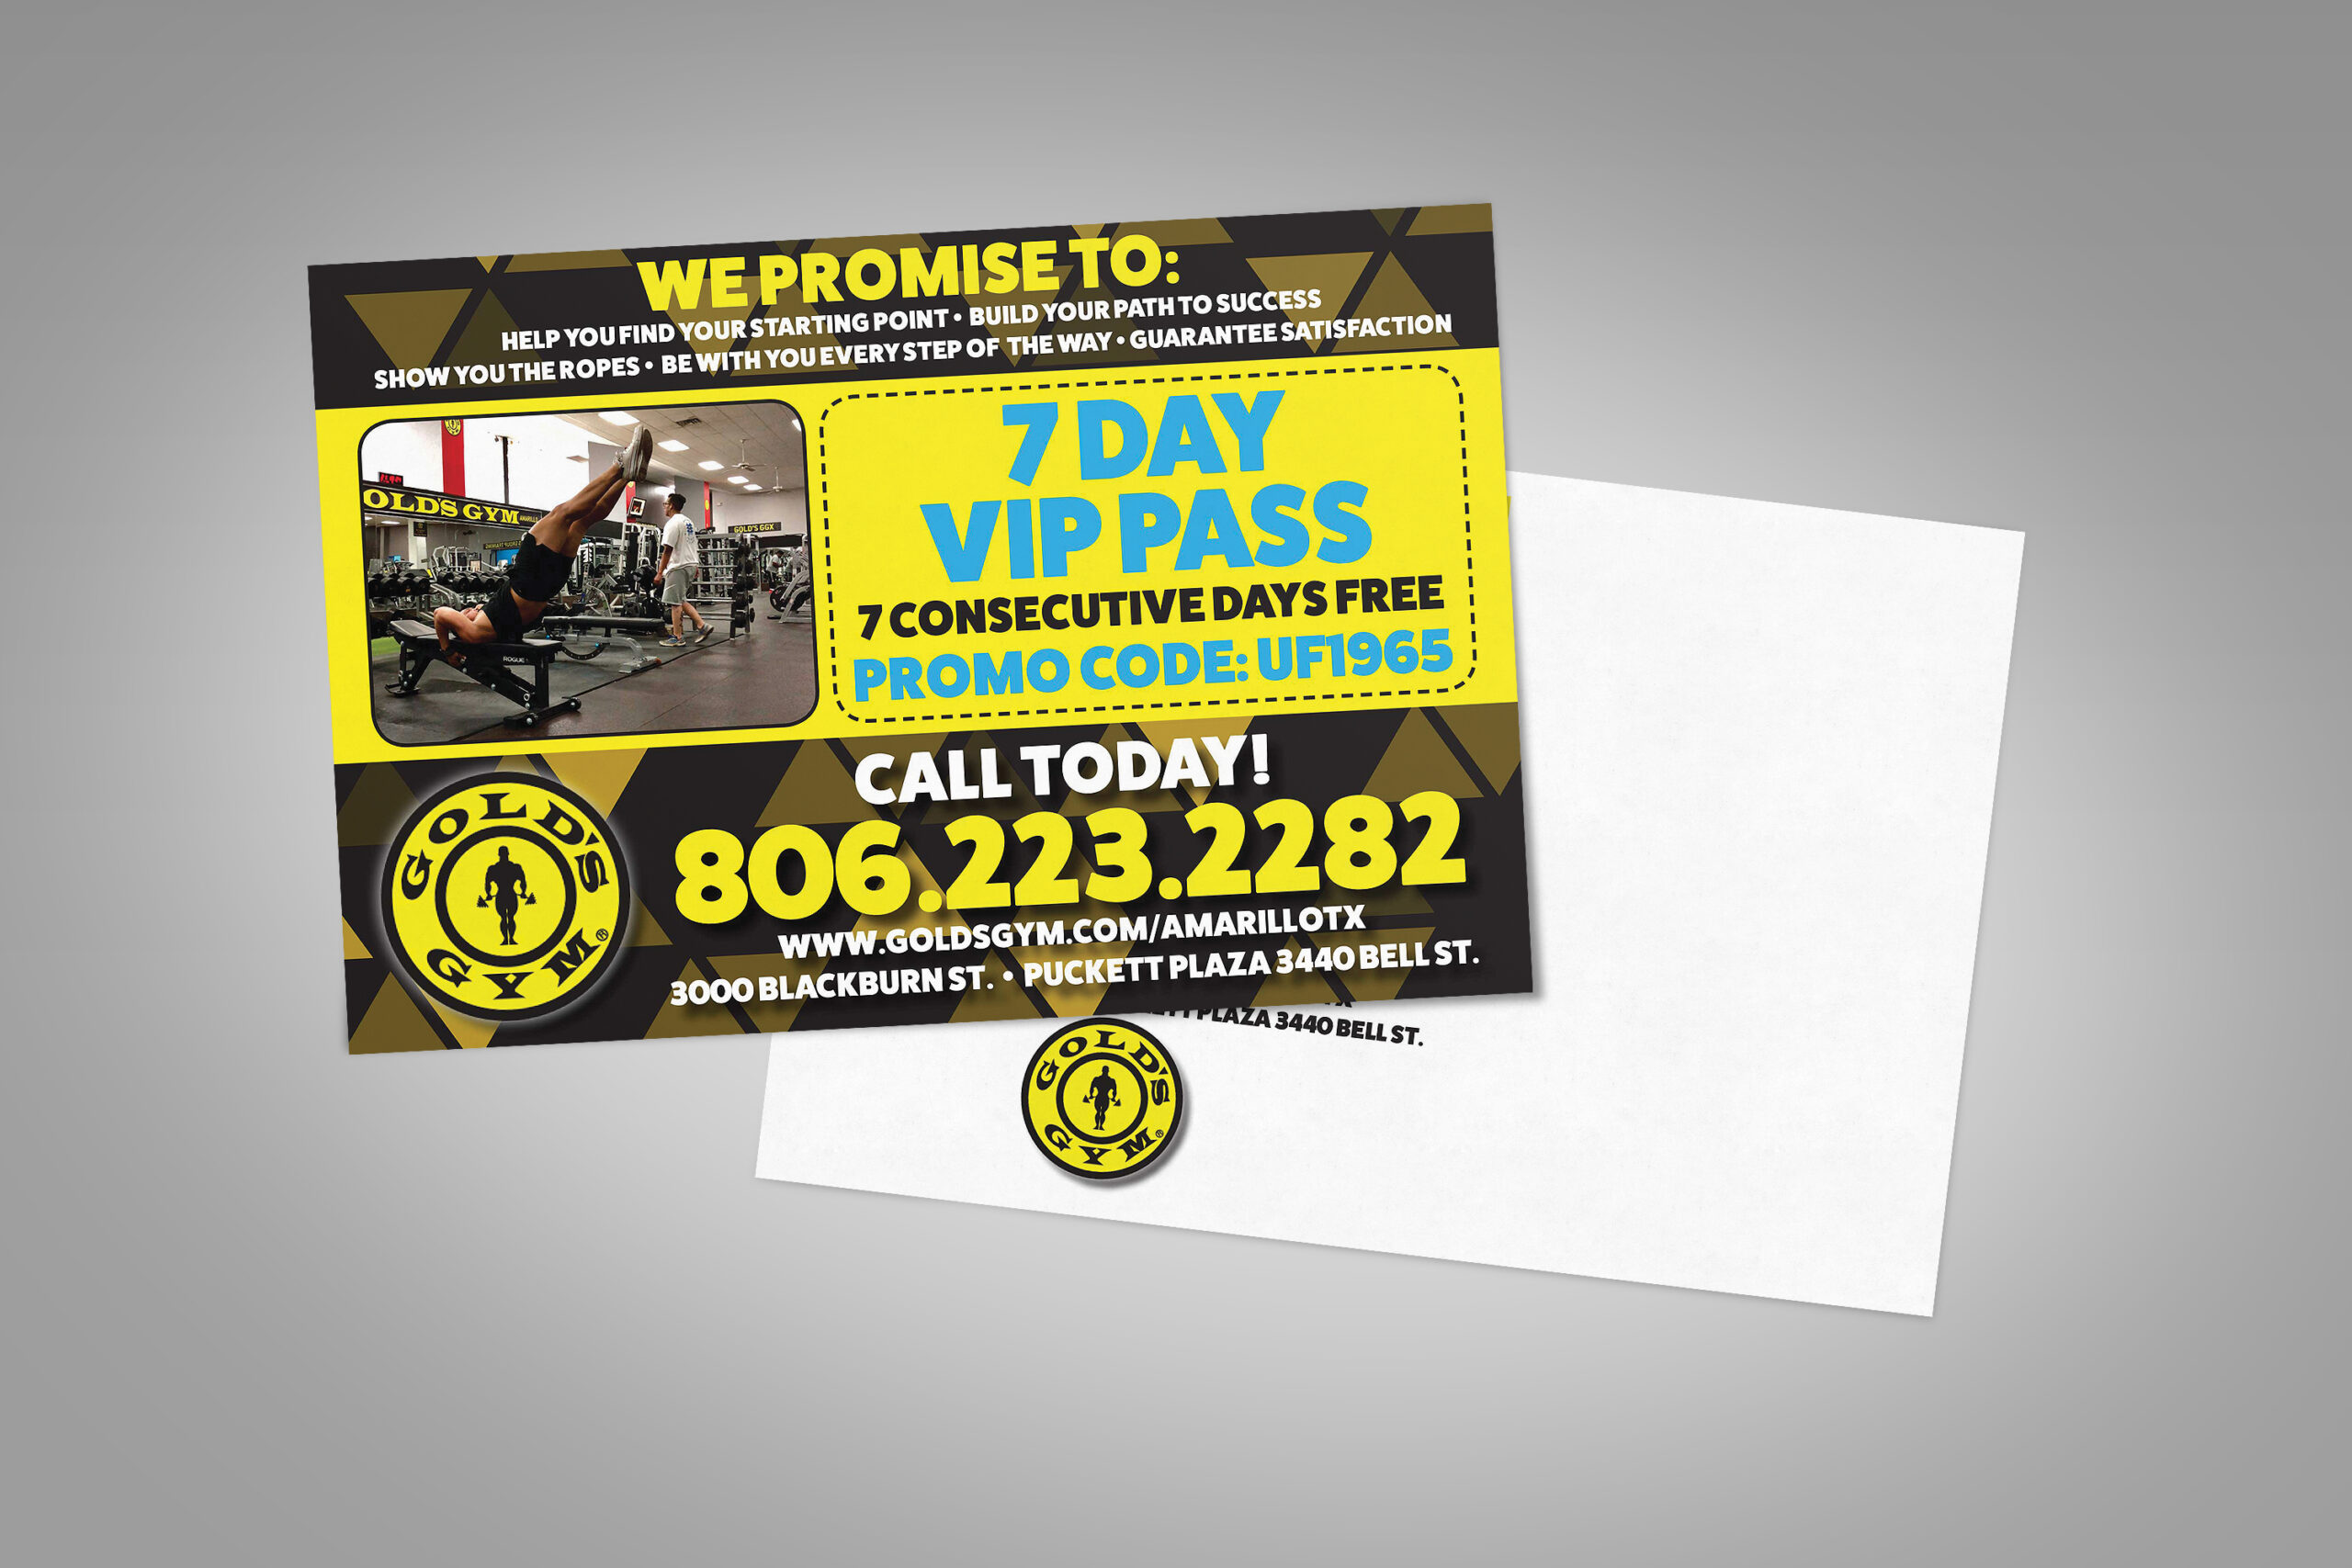 Golds Gym Print Mail Design - Brand and Web Design Agency